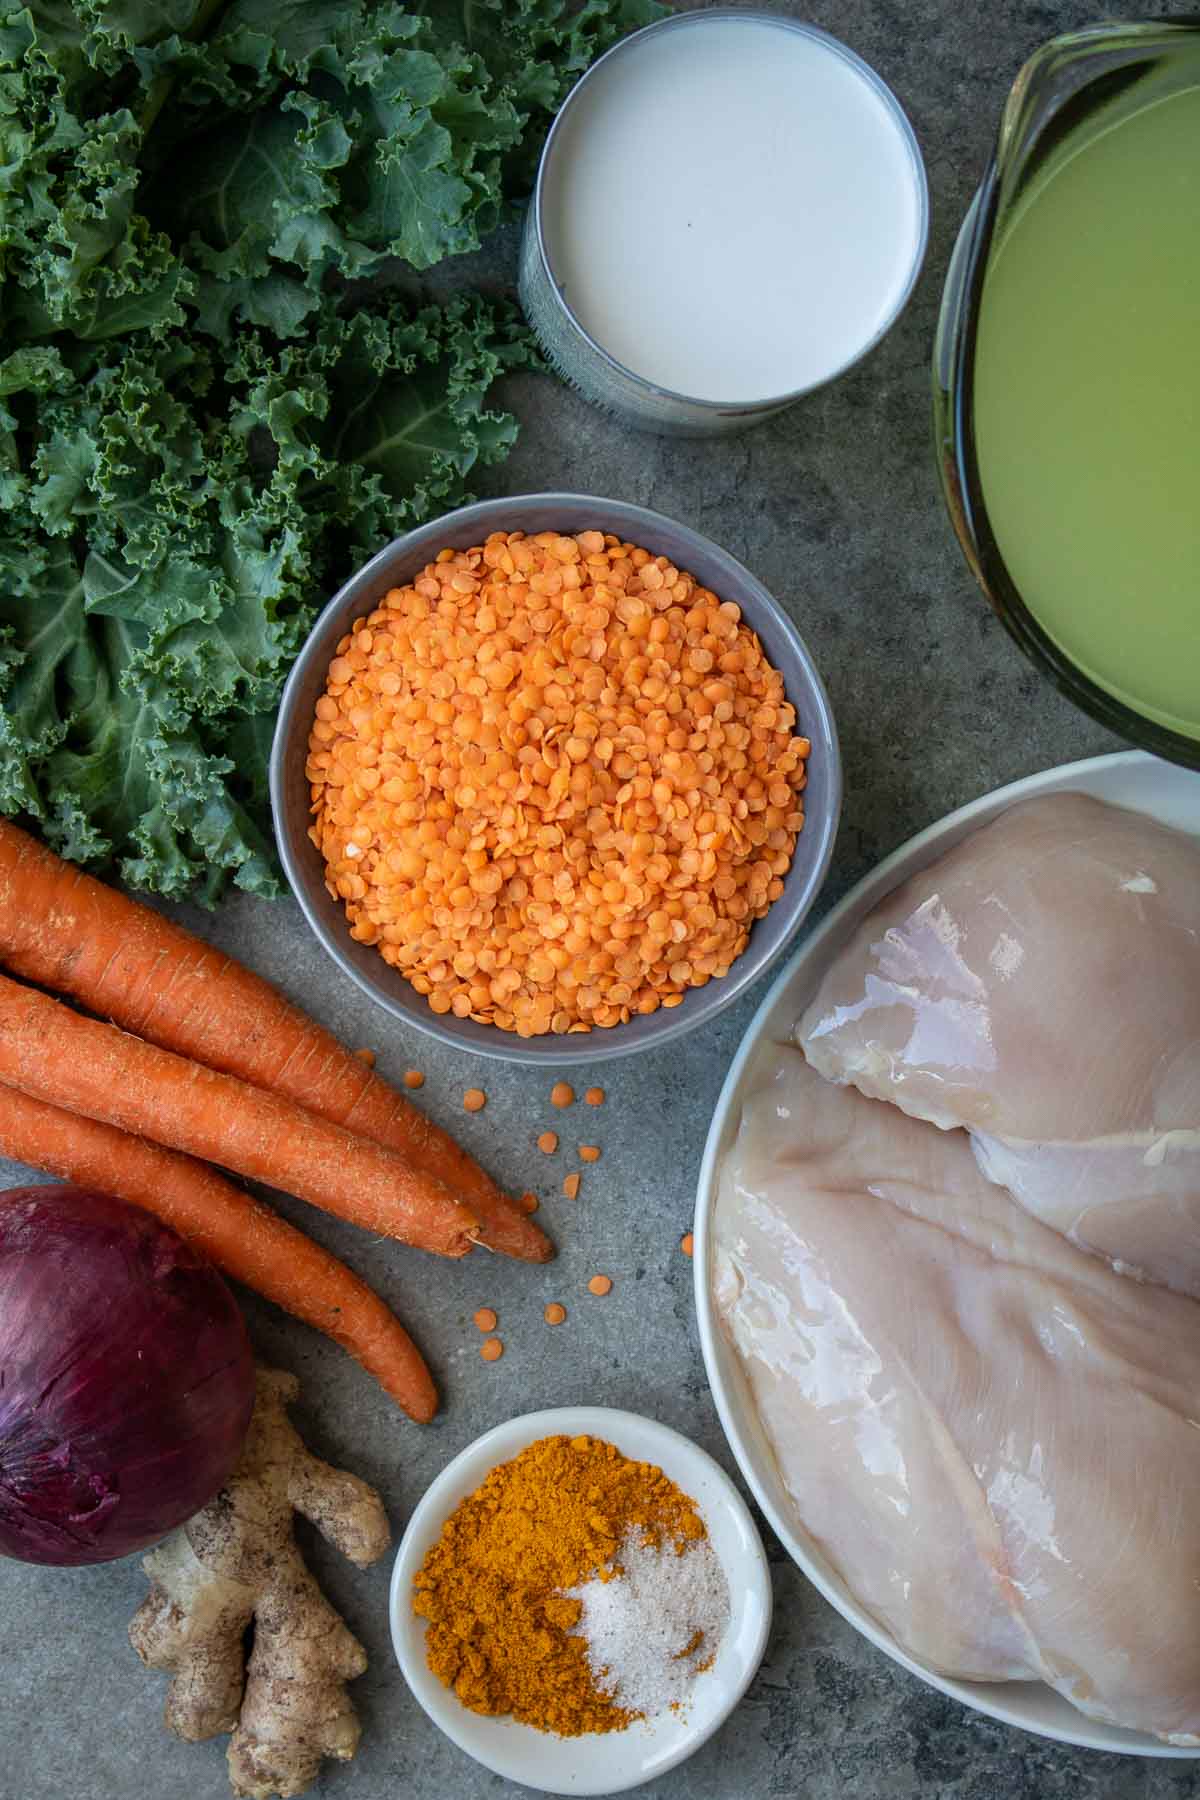 Ingredients for golden chicken lentil soup: red lentils, coconut milk, broth, chicken breasts, curry powder, turmeric, salt, ginger, garlic, onion, carrots, and kale.